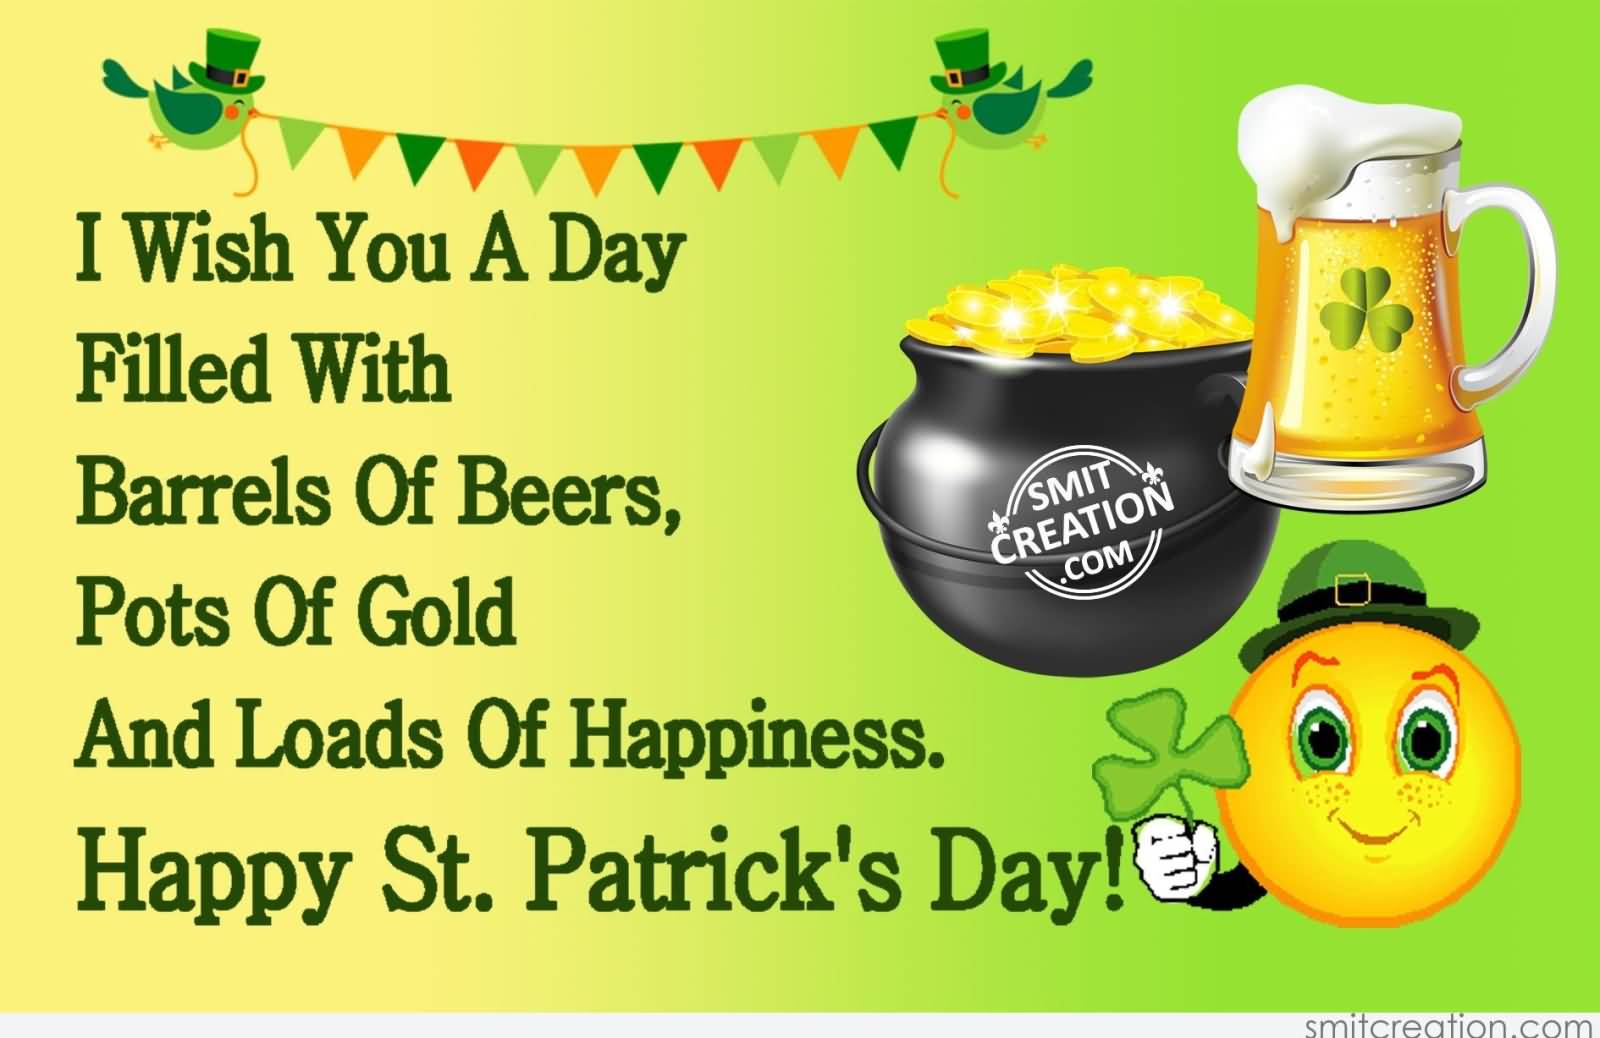 I Wish You A Day Filled With Barrels Of Beers, Pots Of Gold And Loards Of Happiness. Happy Saint Patrick’s Day